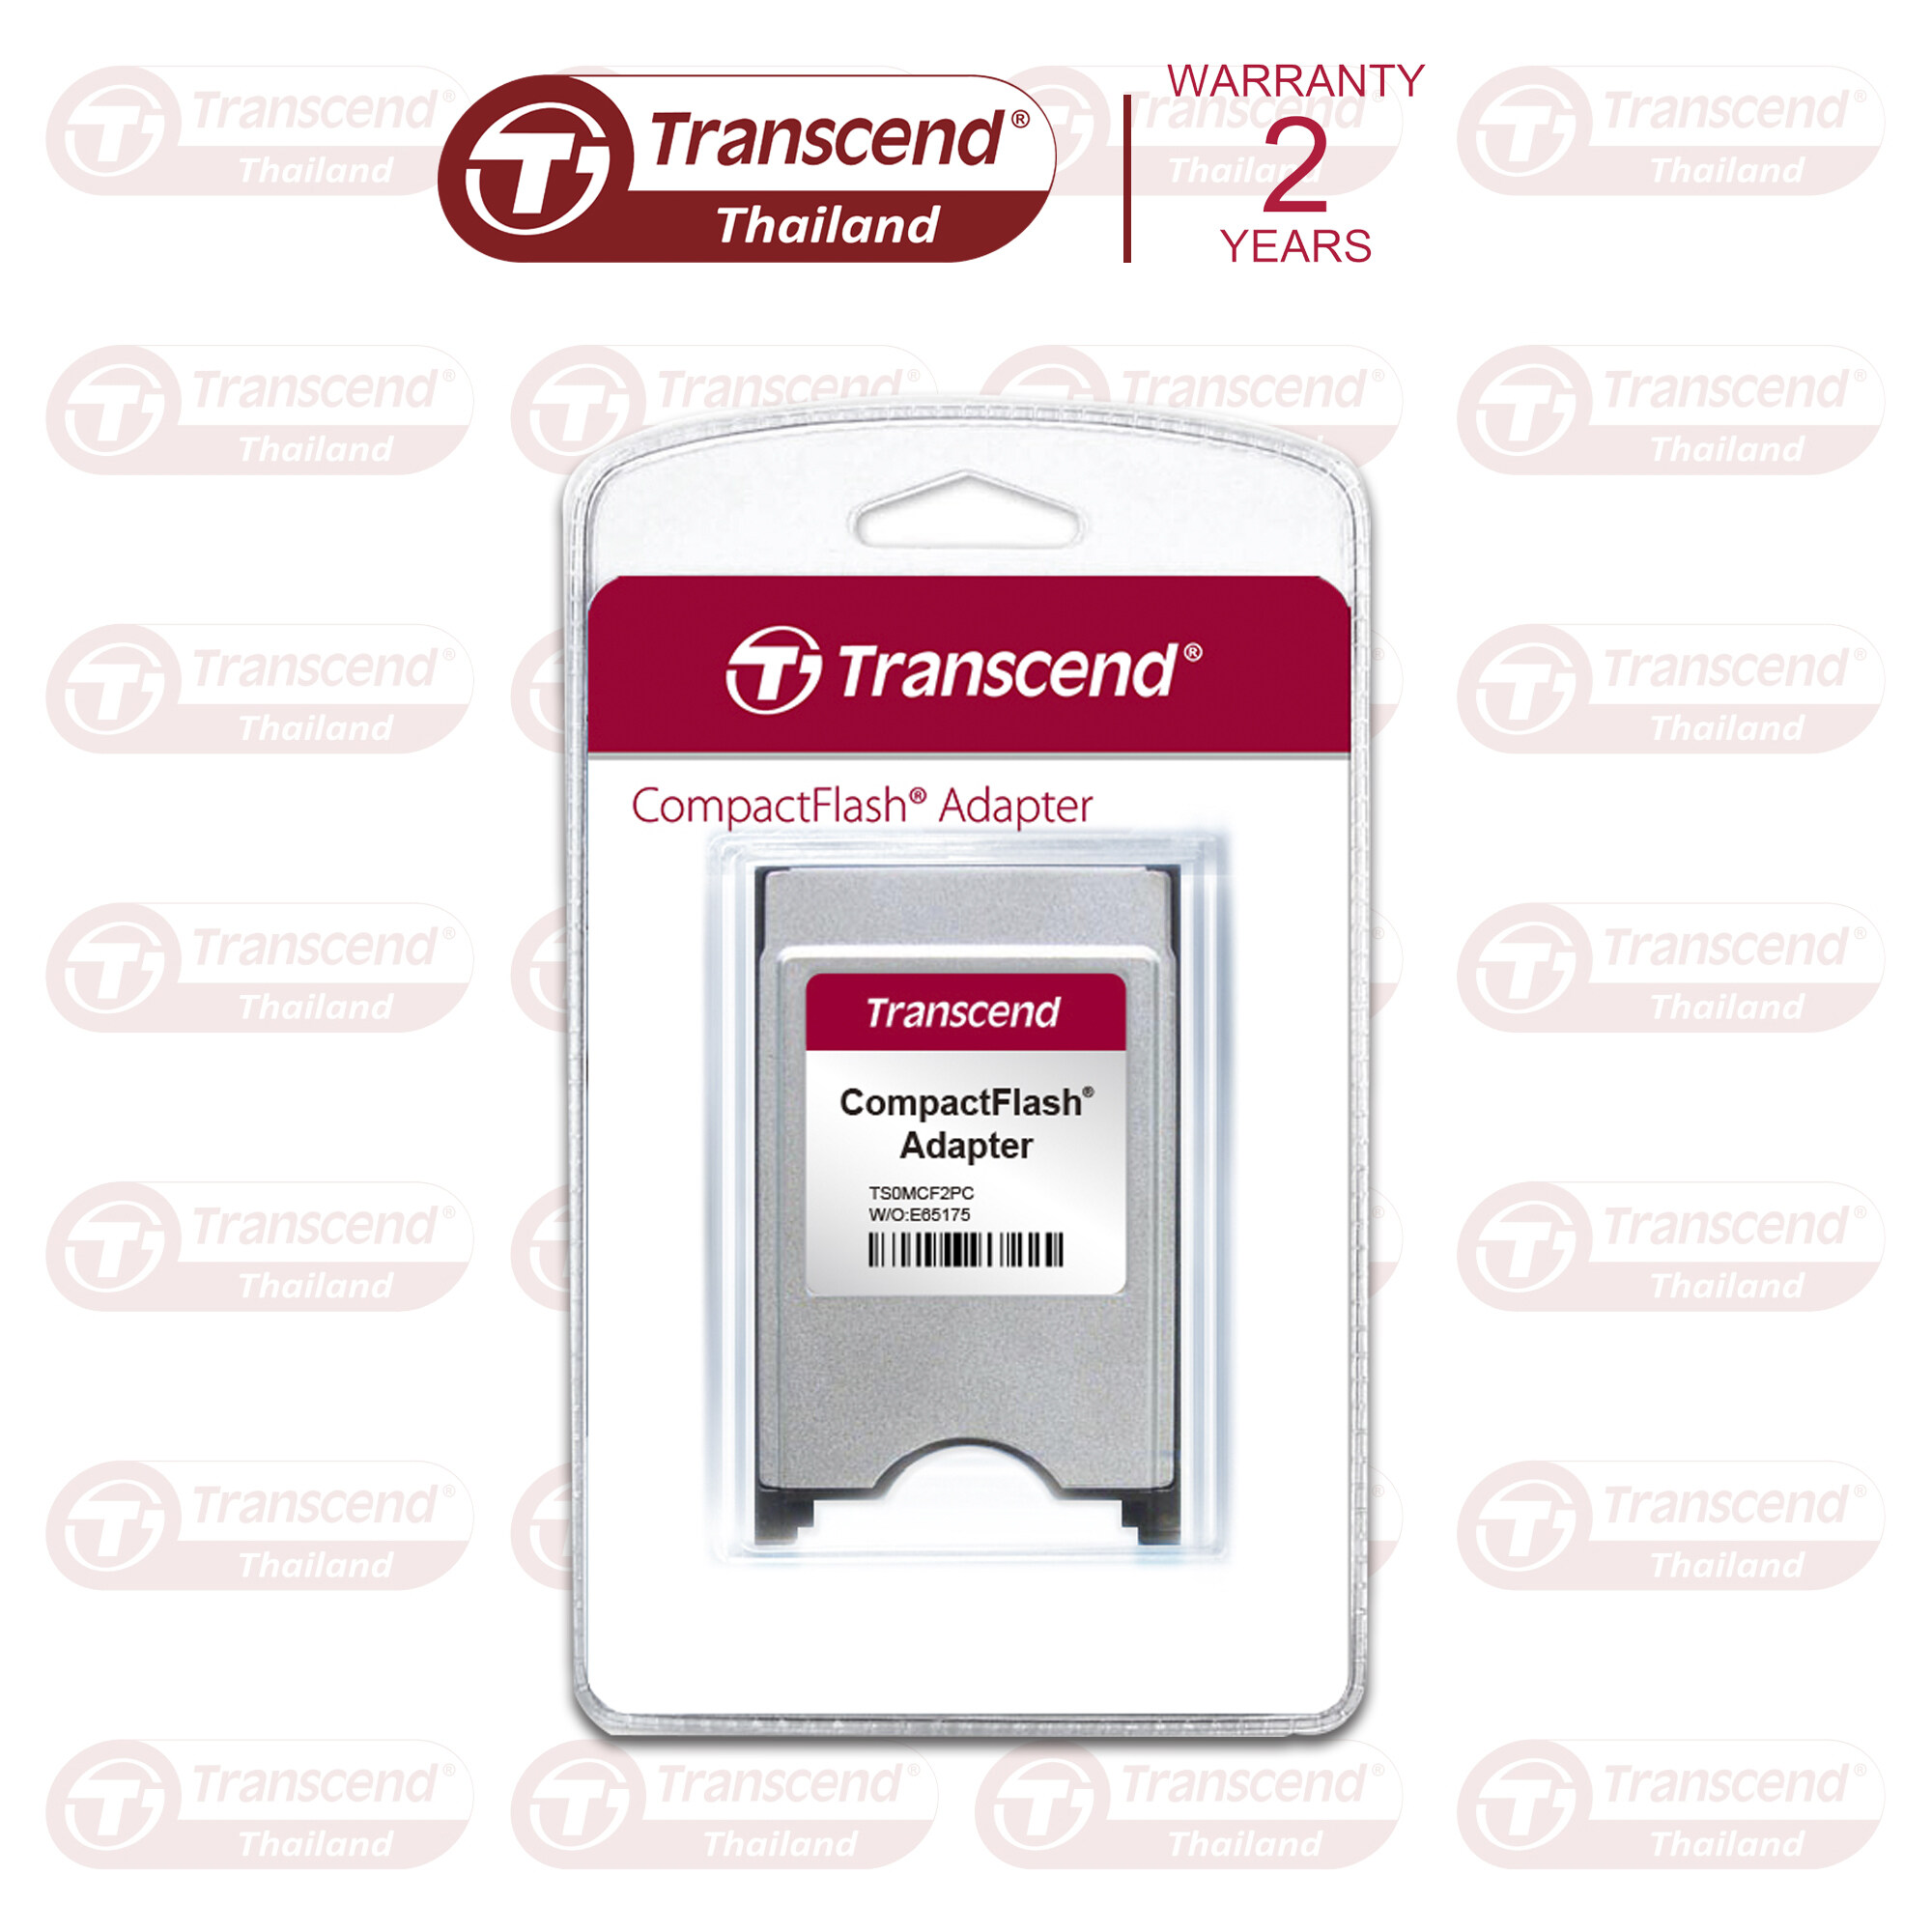 CompactFlash (Type I) Card Adapter : 68 pin PCMCIA : CF Card Adapter : TS0MCF2PC : Transcend - รับประกัน 2 ปี - มีใบกำกับภาษี